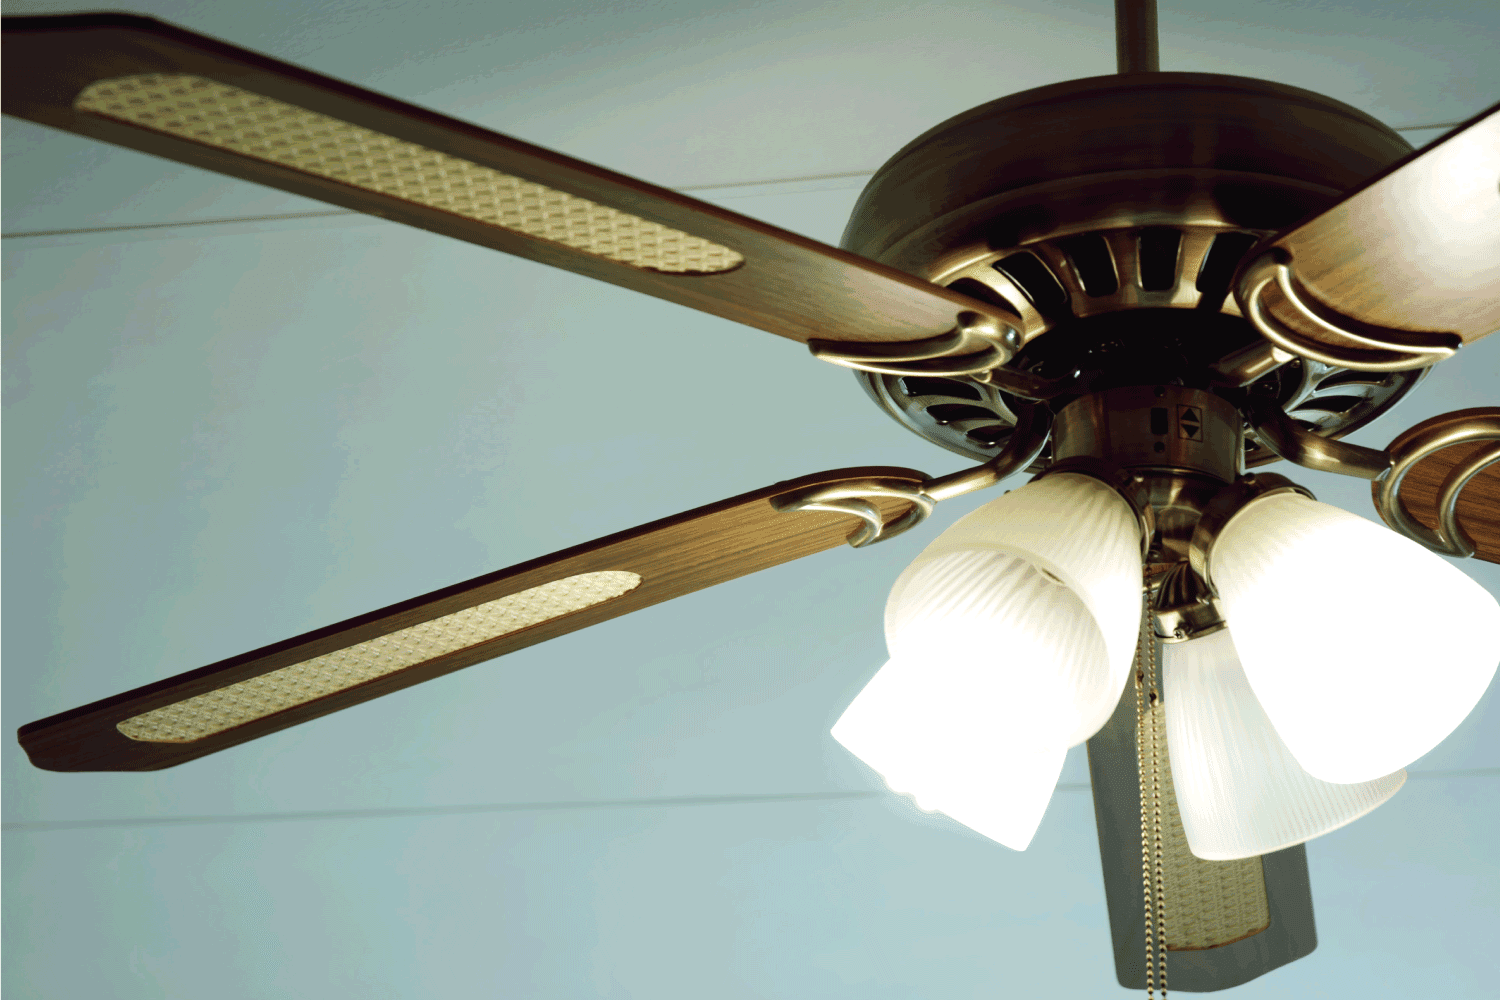 retro style ceiling fan with wooden blades and lighted centerpiece